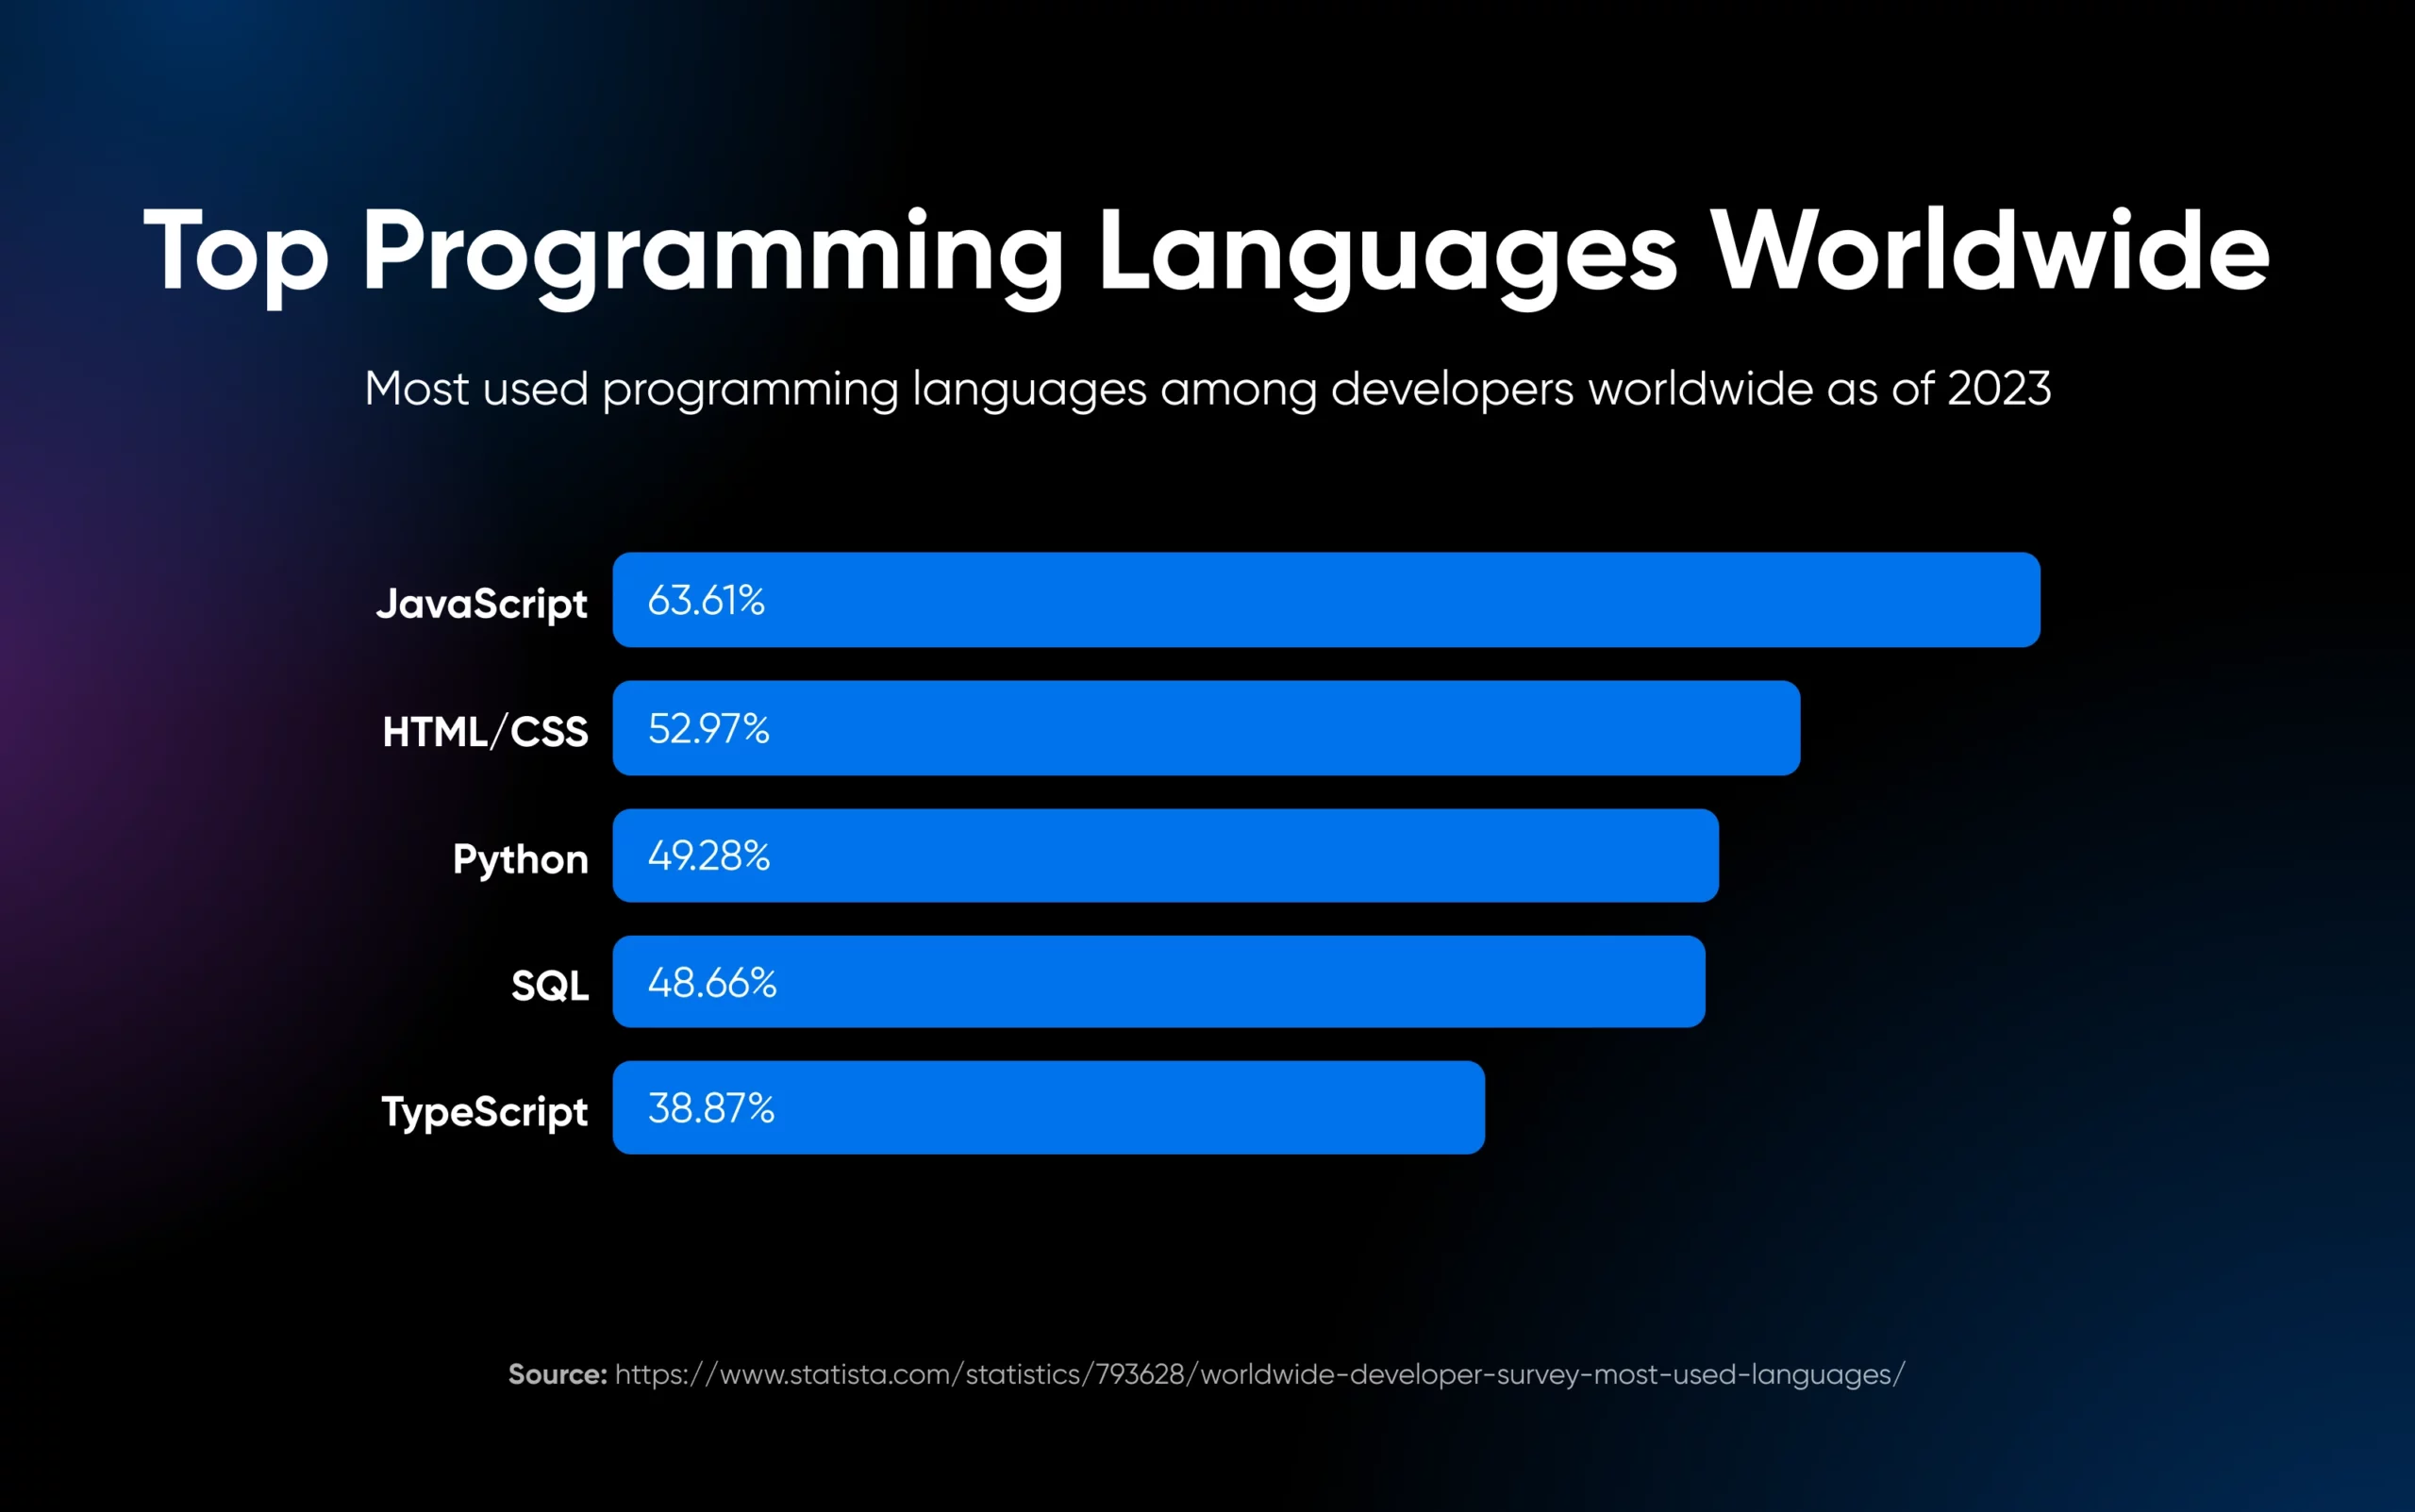 Bar chart ranking the top programming languages among developers globally in 2023. JavaScript is the most popular at 63.61%